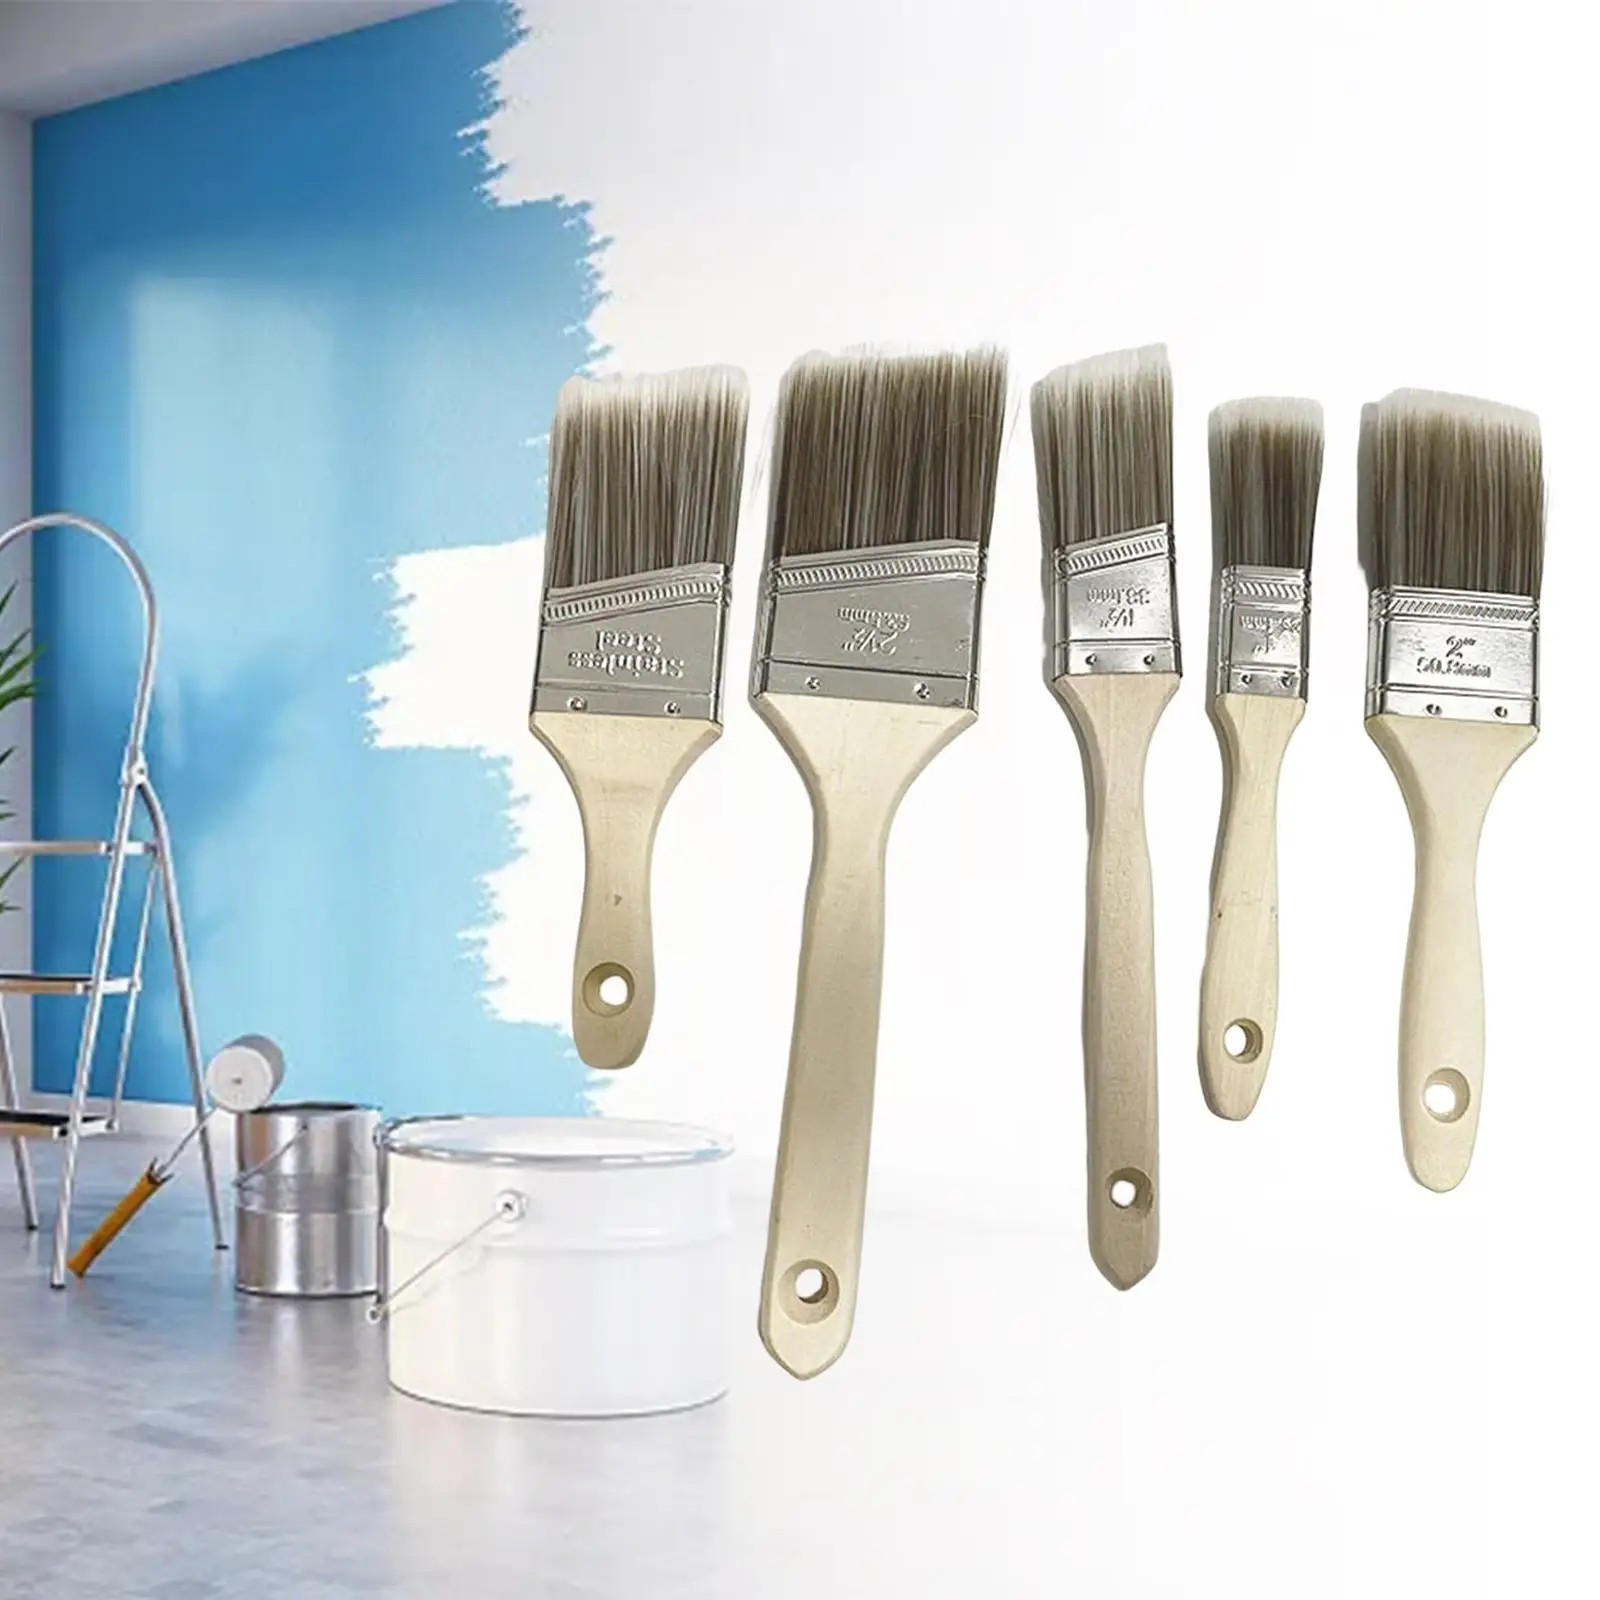 5x Wall Paint Brushes Professional for Home Renovations Bathrooms Baseboards